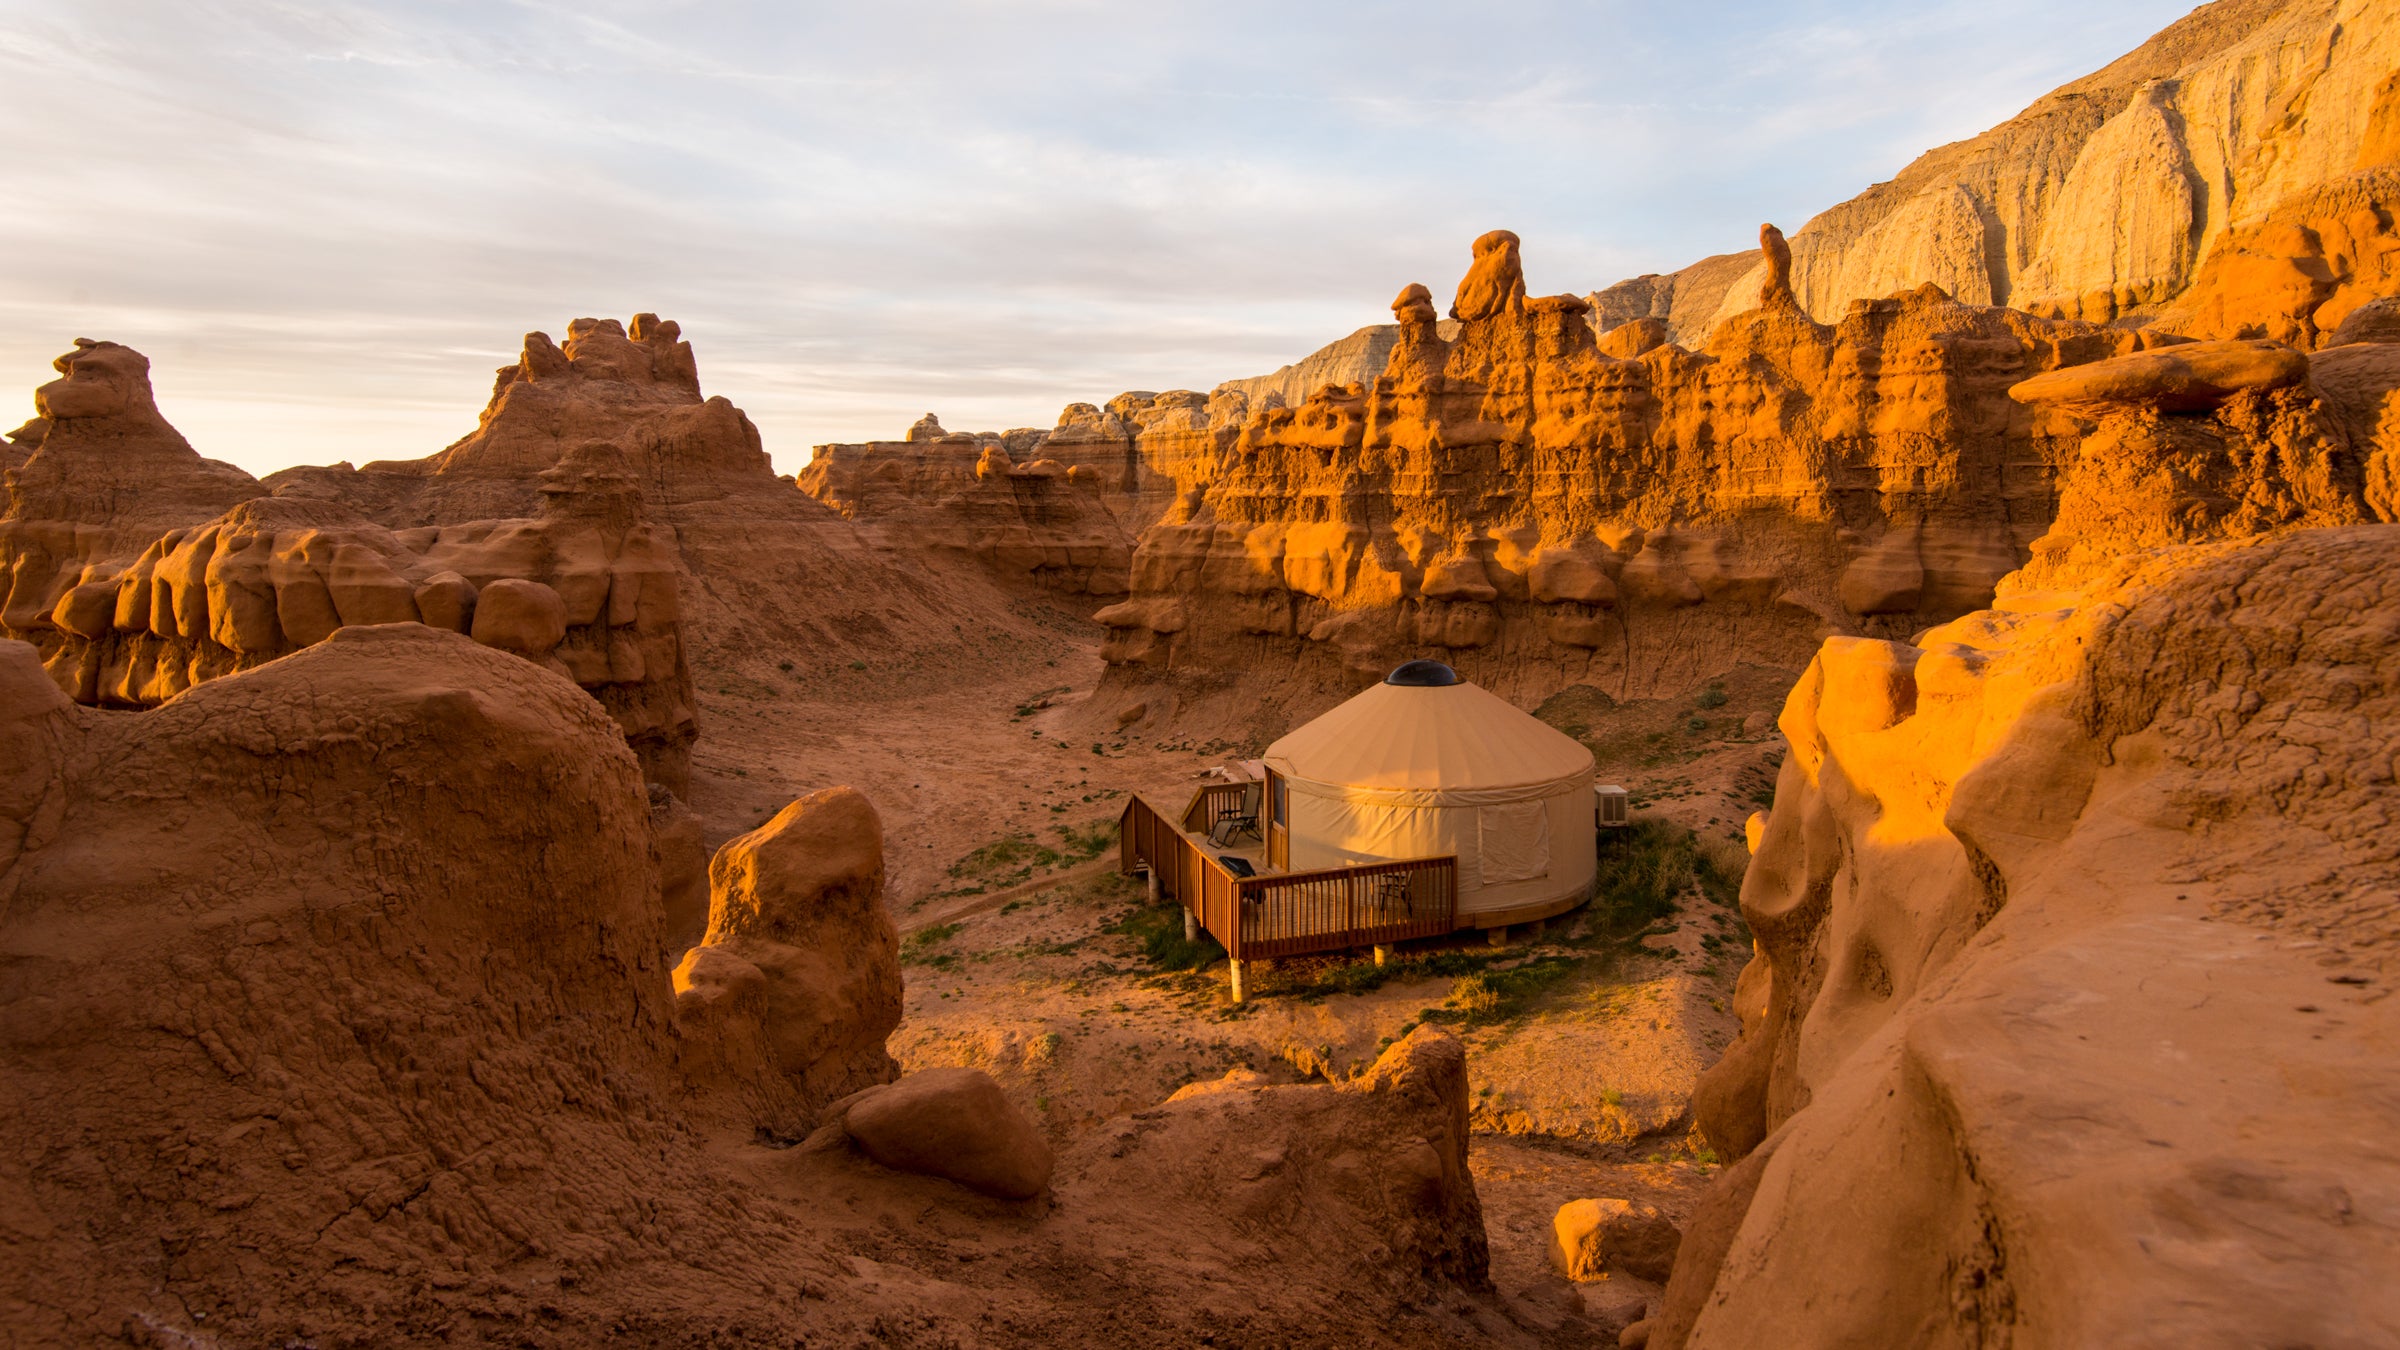 Sunrise hits a yurt below the red-rock cliffs of Goblin Valley.